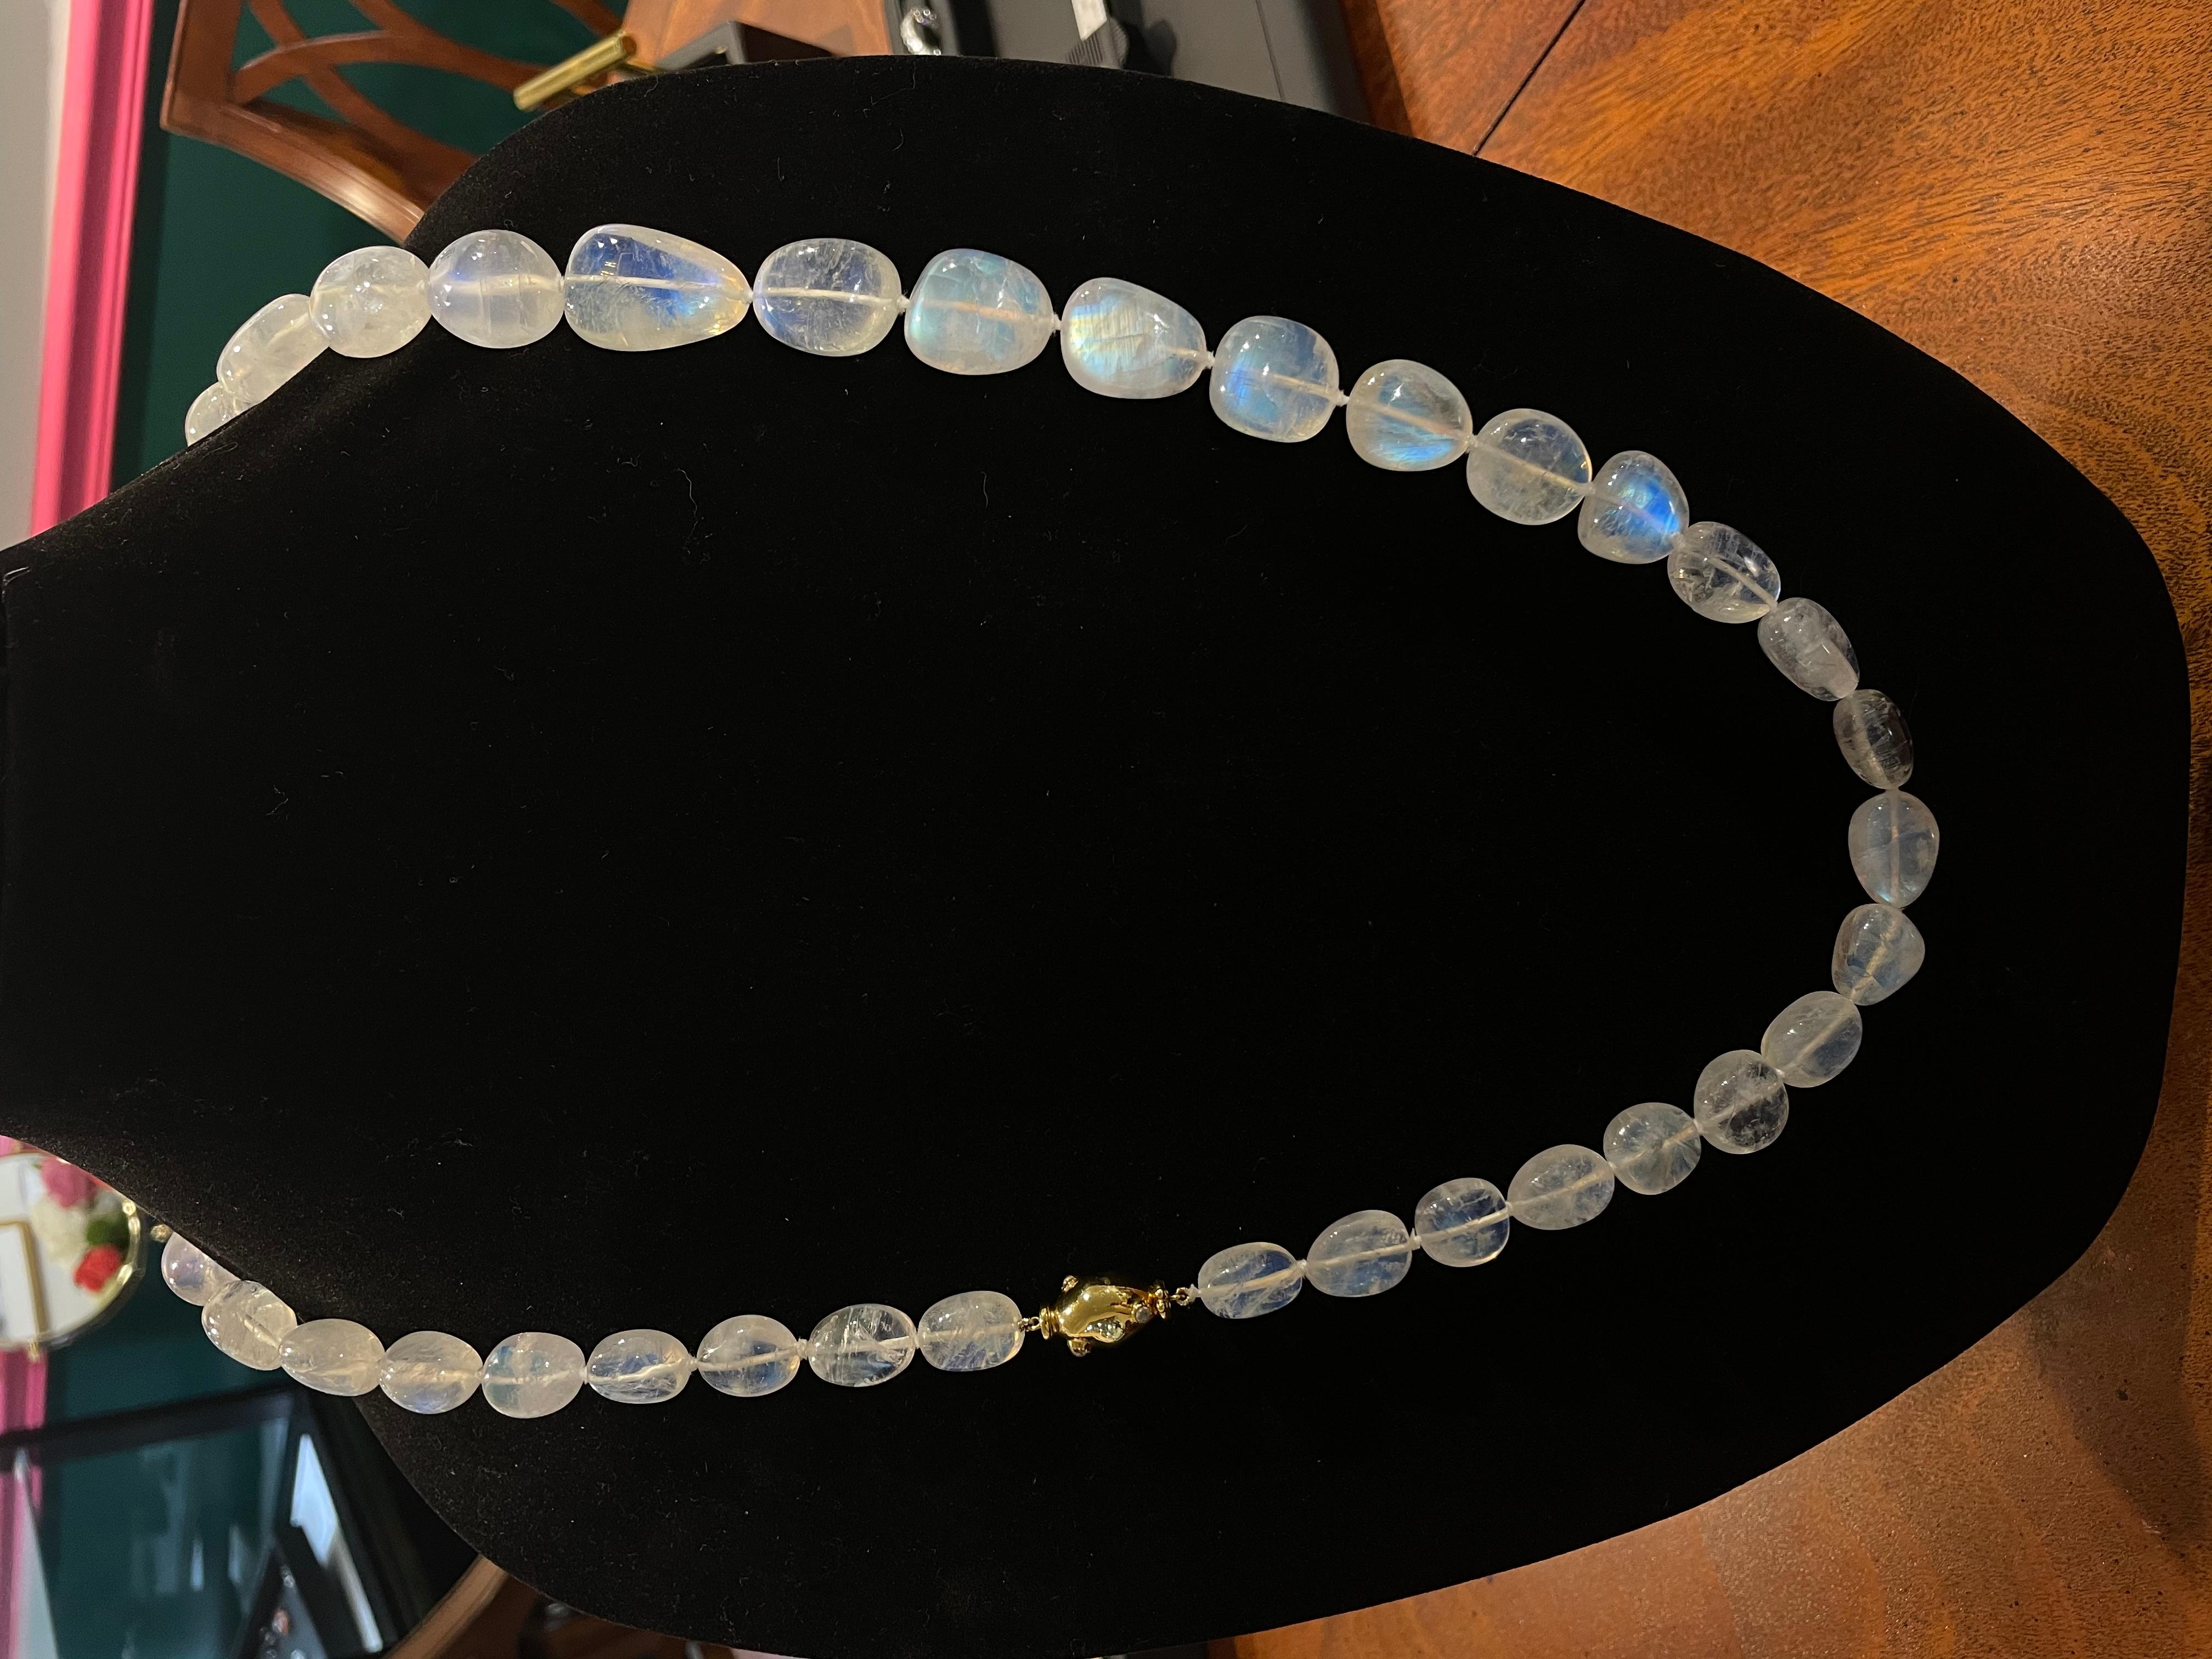 40 stunning moonstone beads strung and individually knotted with the an exceptional 14kt yellow gold clasp with moonstone accents. This is a one of a kind Victor Velyan creation.